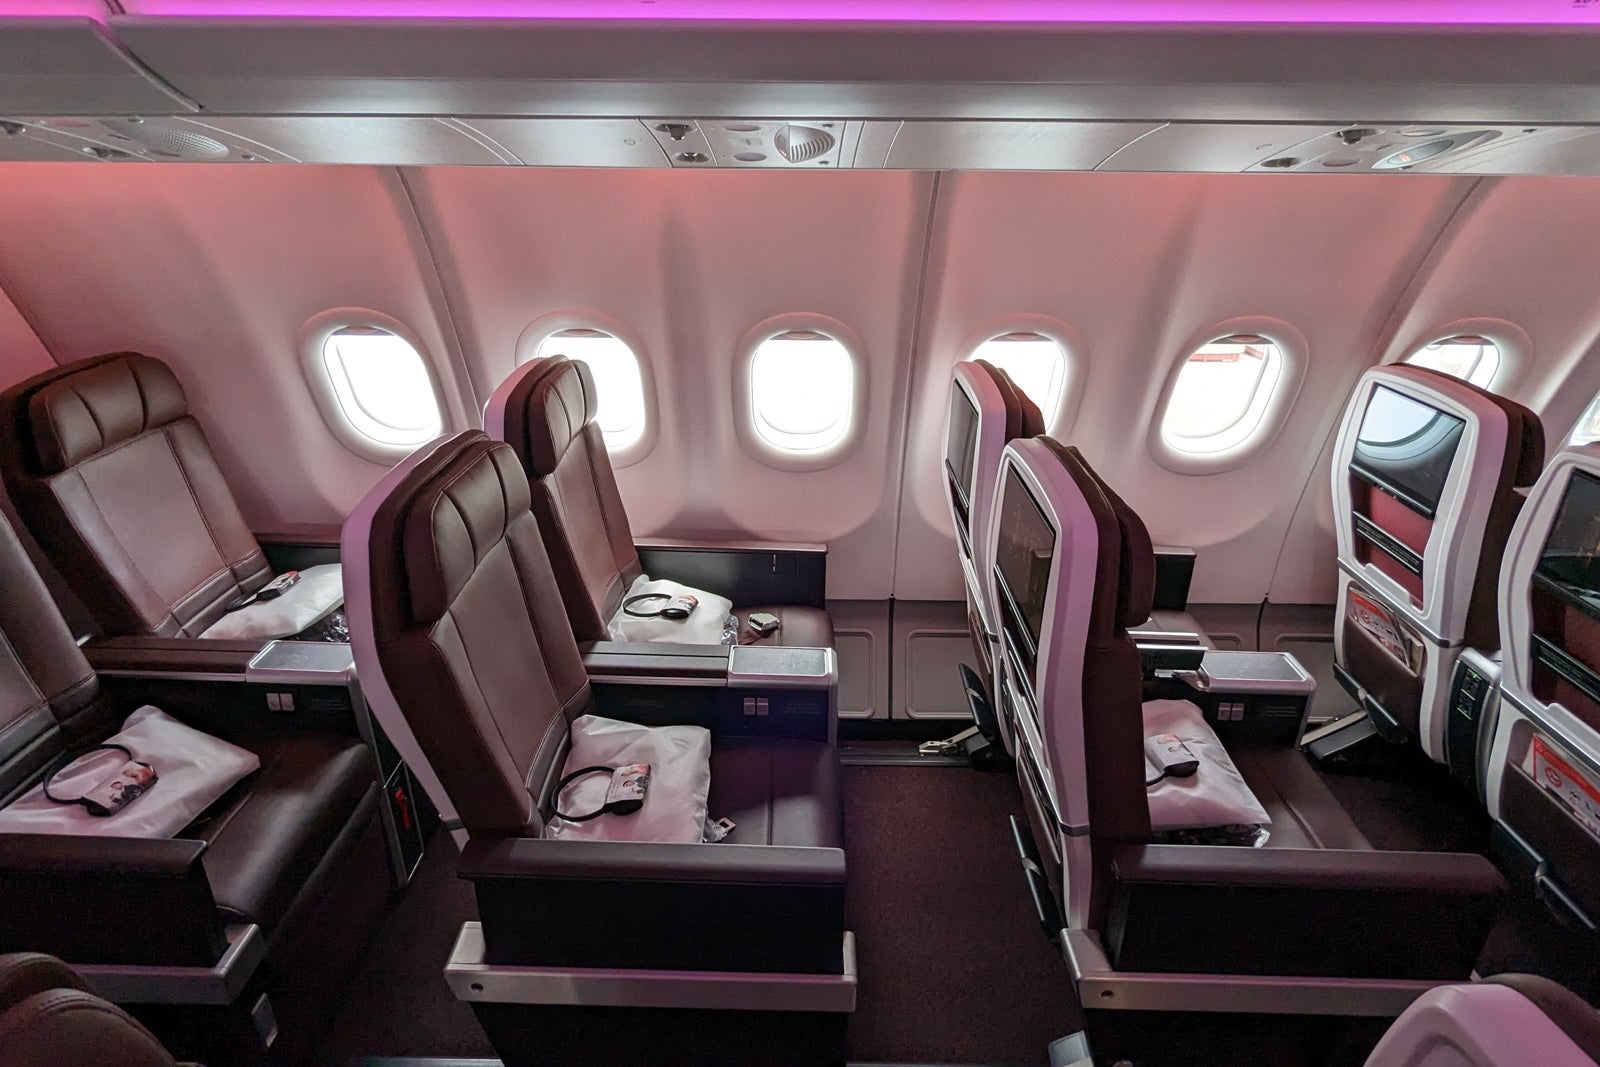 Virgin Atlantic: 9 inches, Play with yourself, Seating chart • Ads of the  World™